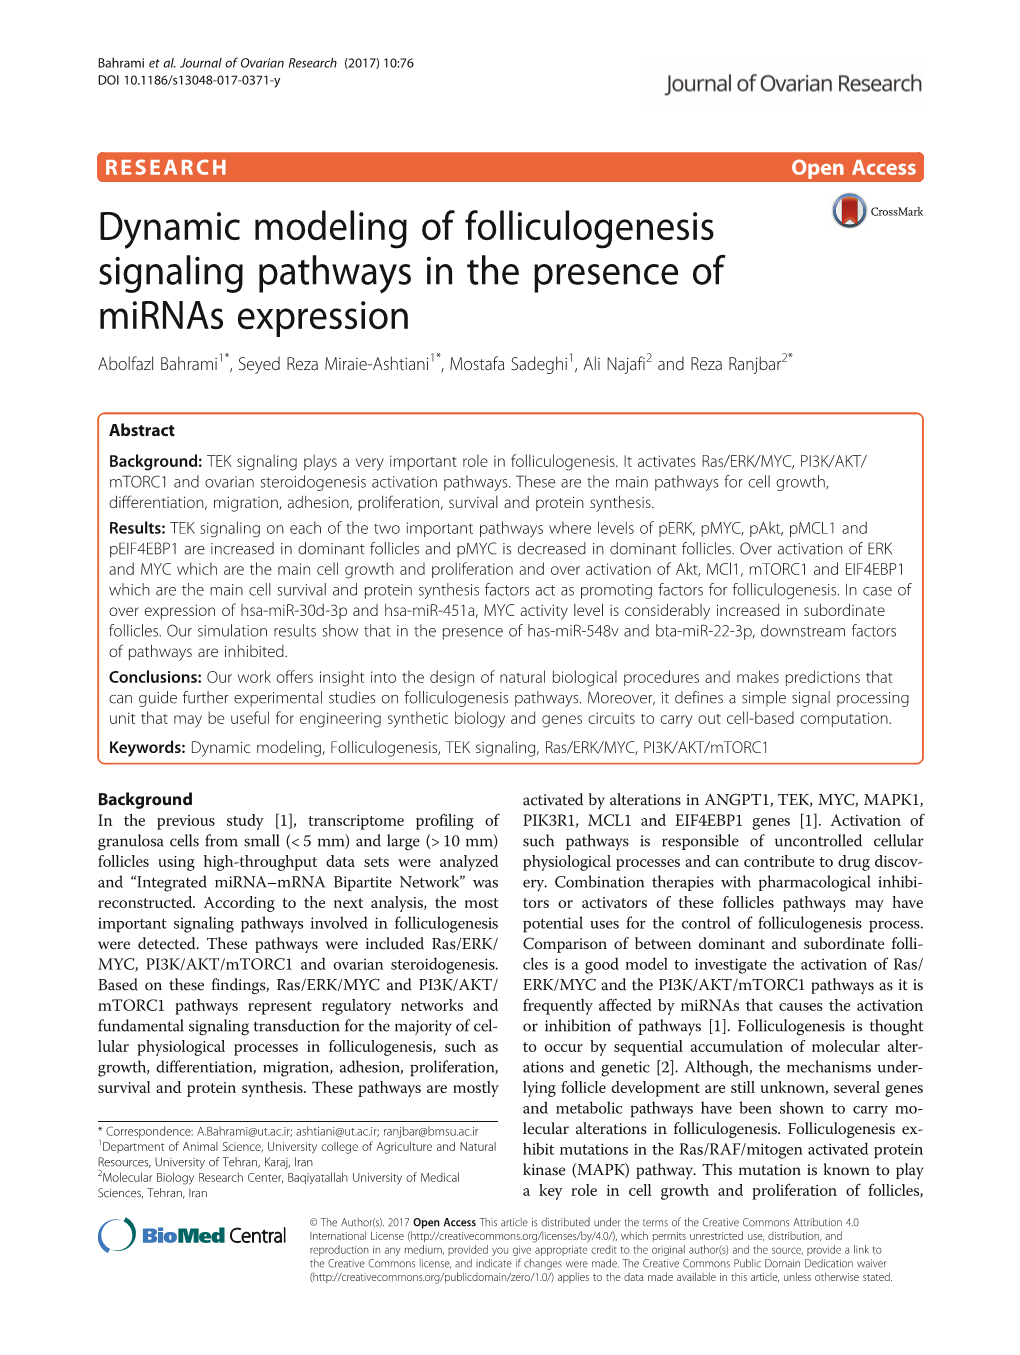 Dynamic Modeling of Folliculogenesis Signaling Pathways in the Presence